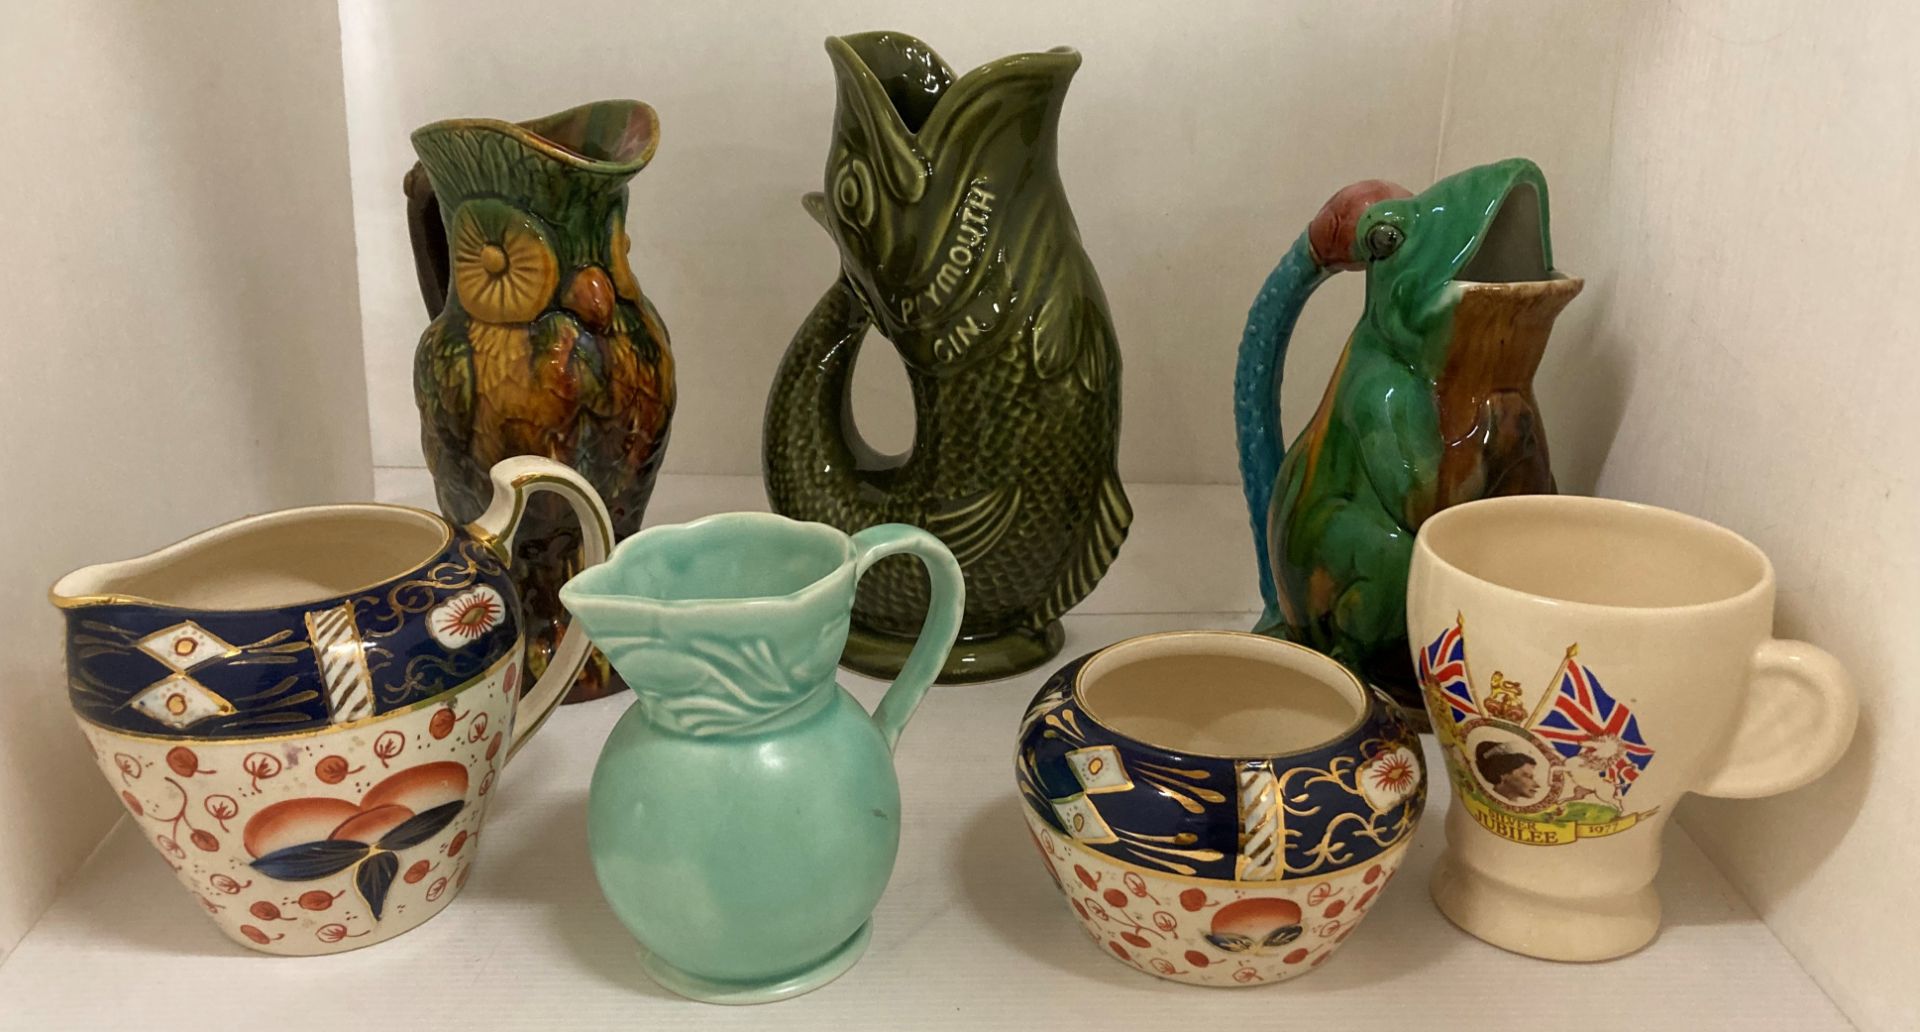 A Dartmouth Devon Plymouth Gin green glazed fish jug, frog and parrot jugs, etc.